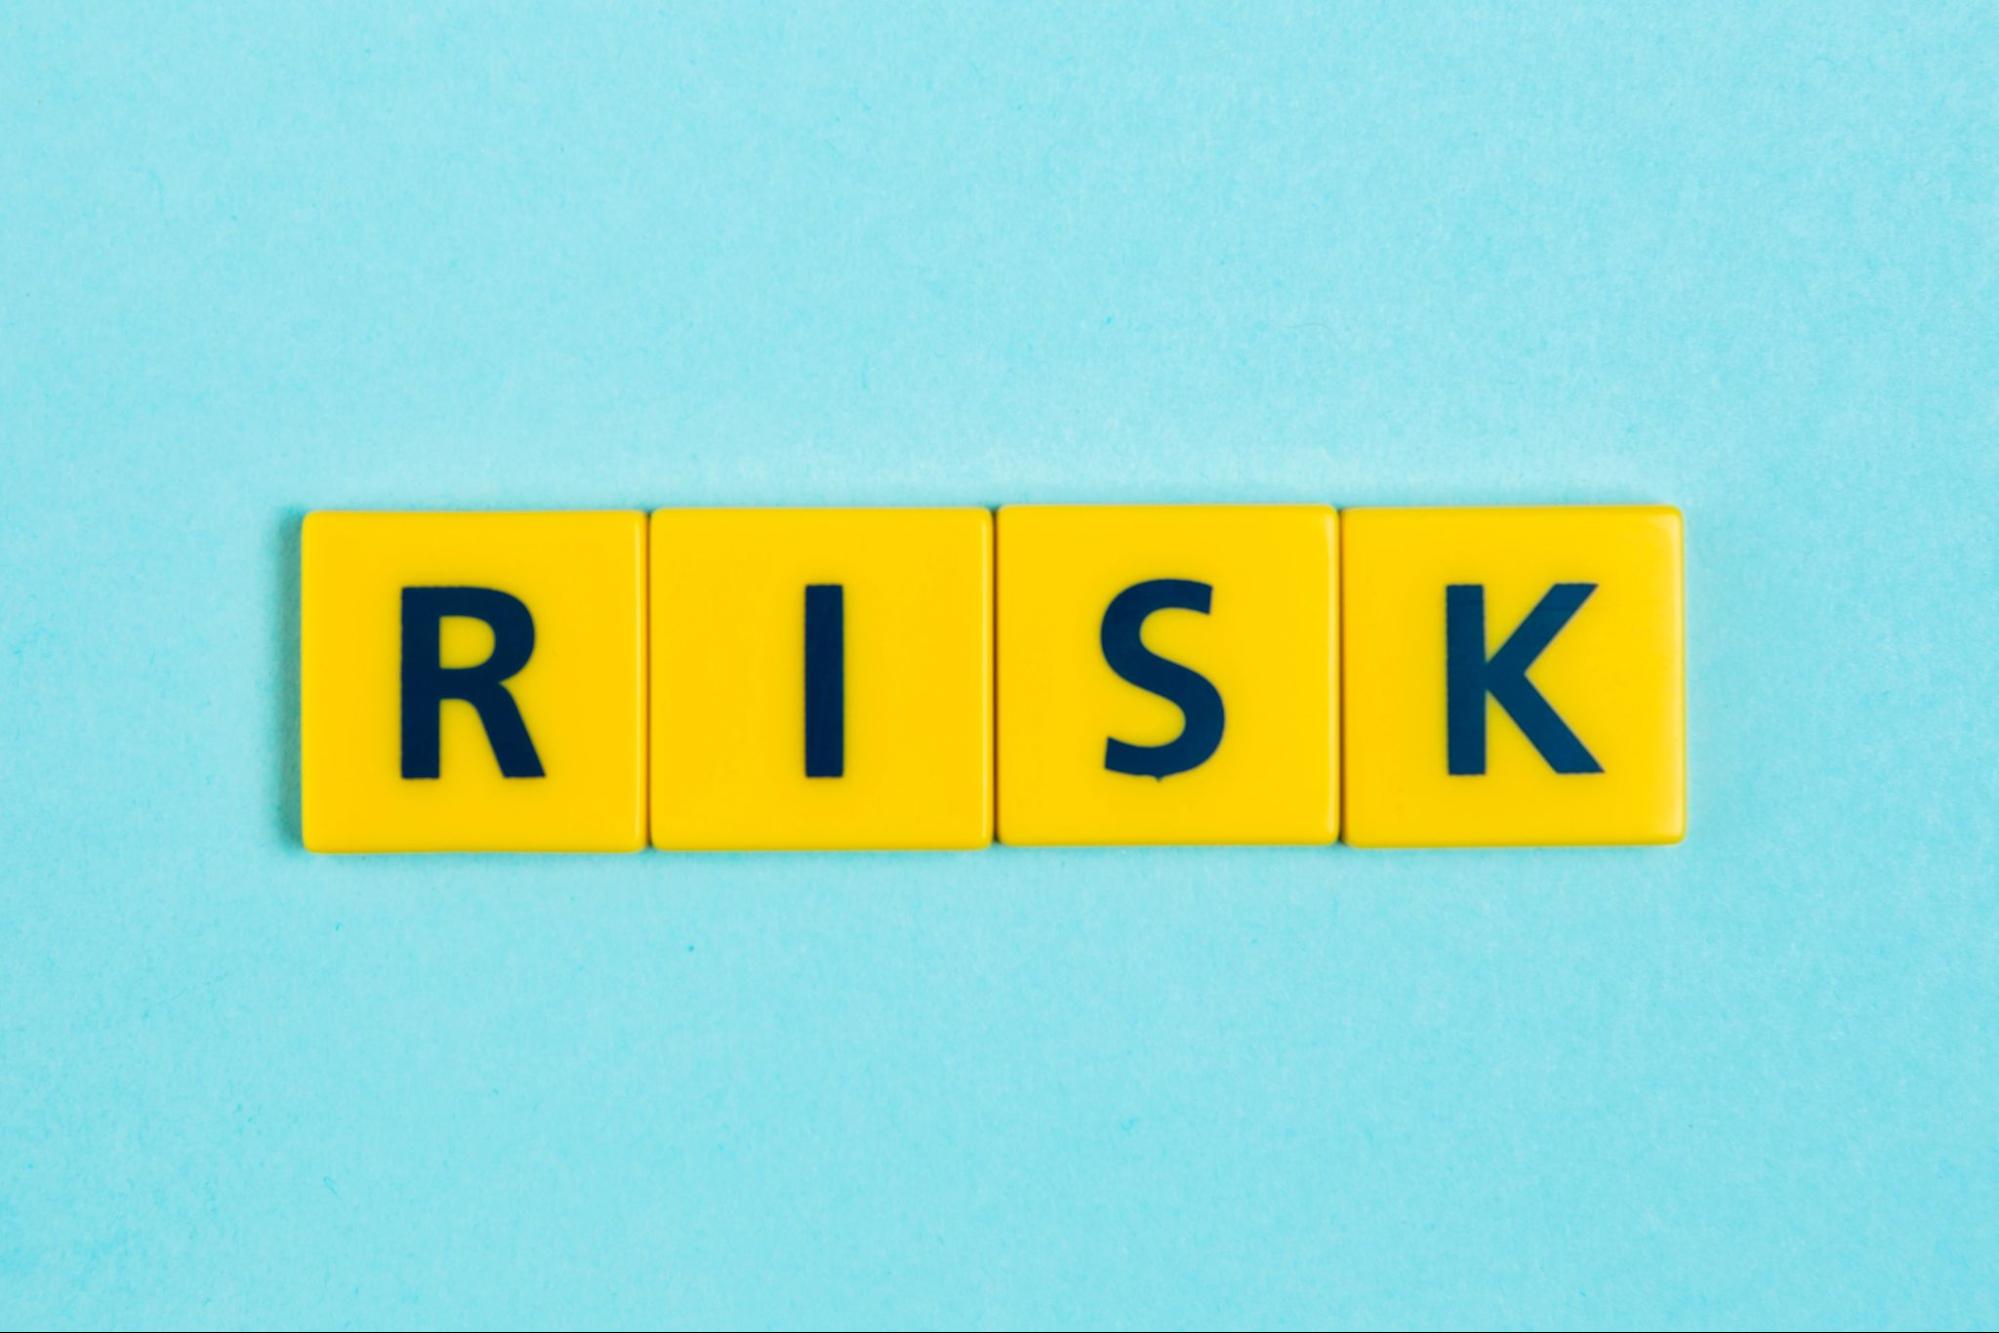 Anticipating and mitigating risks is paramount